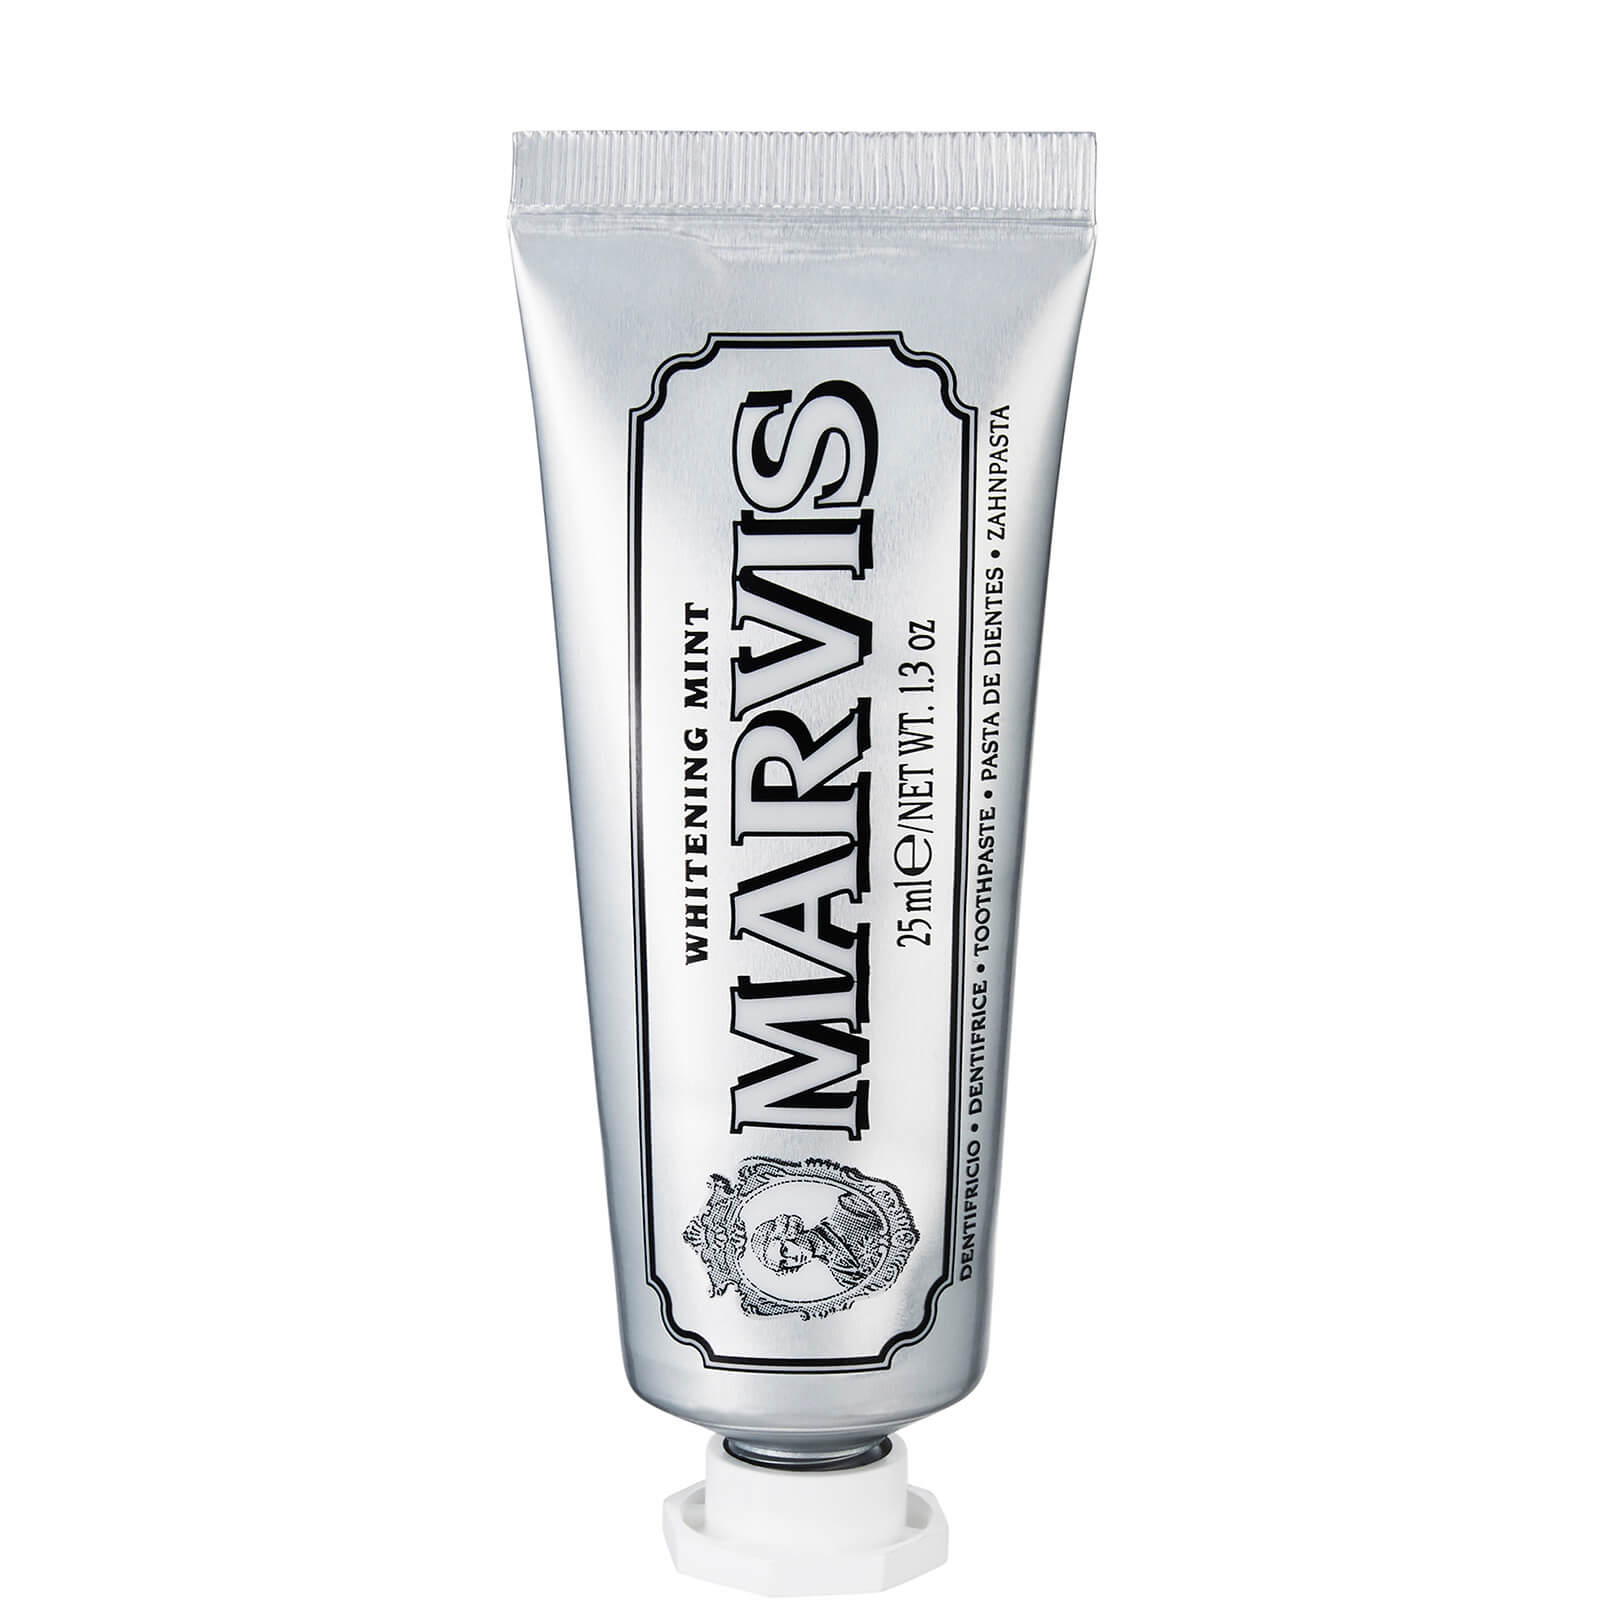 Photos - Toothpaste / Mouthwash Marvis Travel Size Toothpaste Whitening Mint 